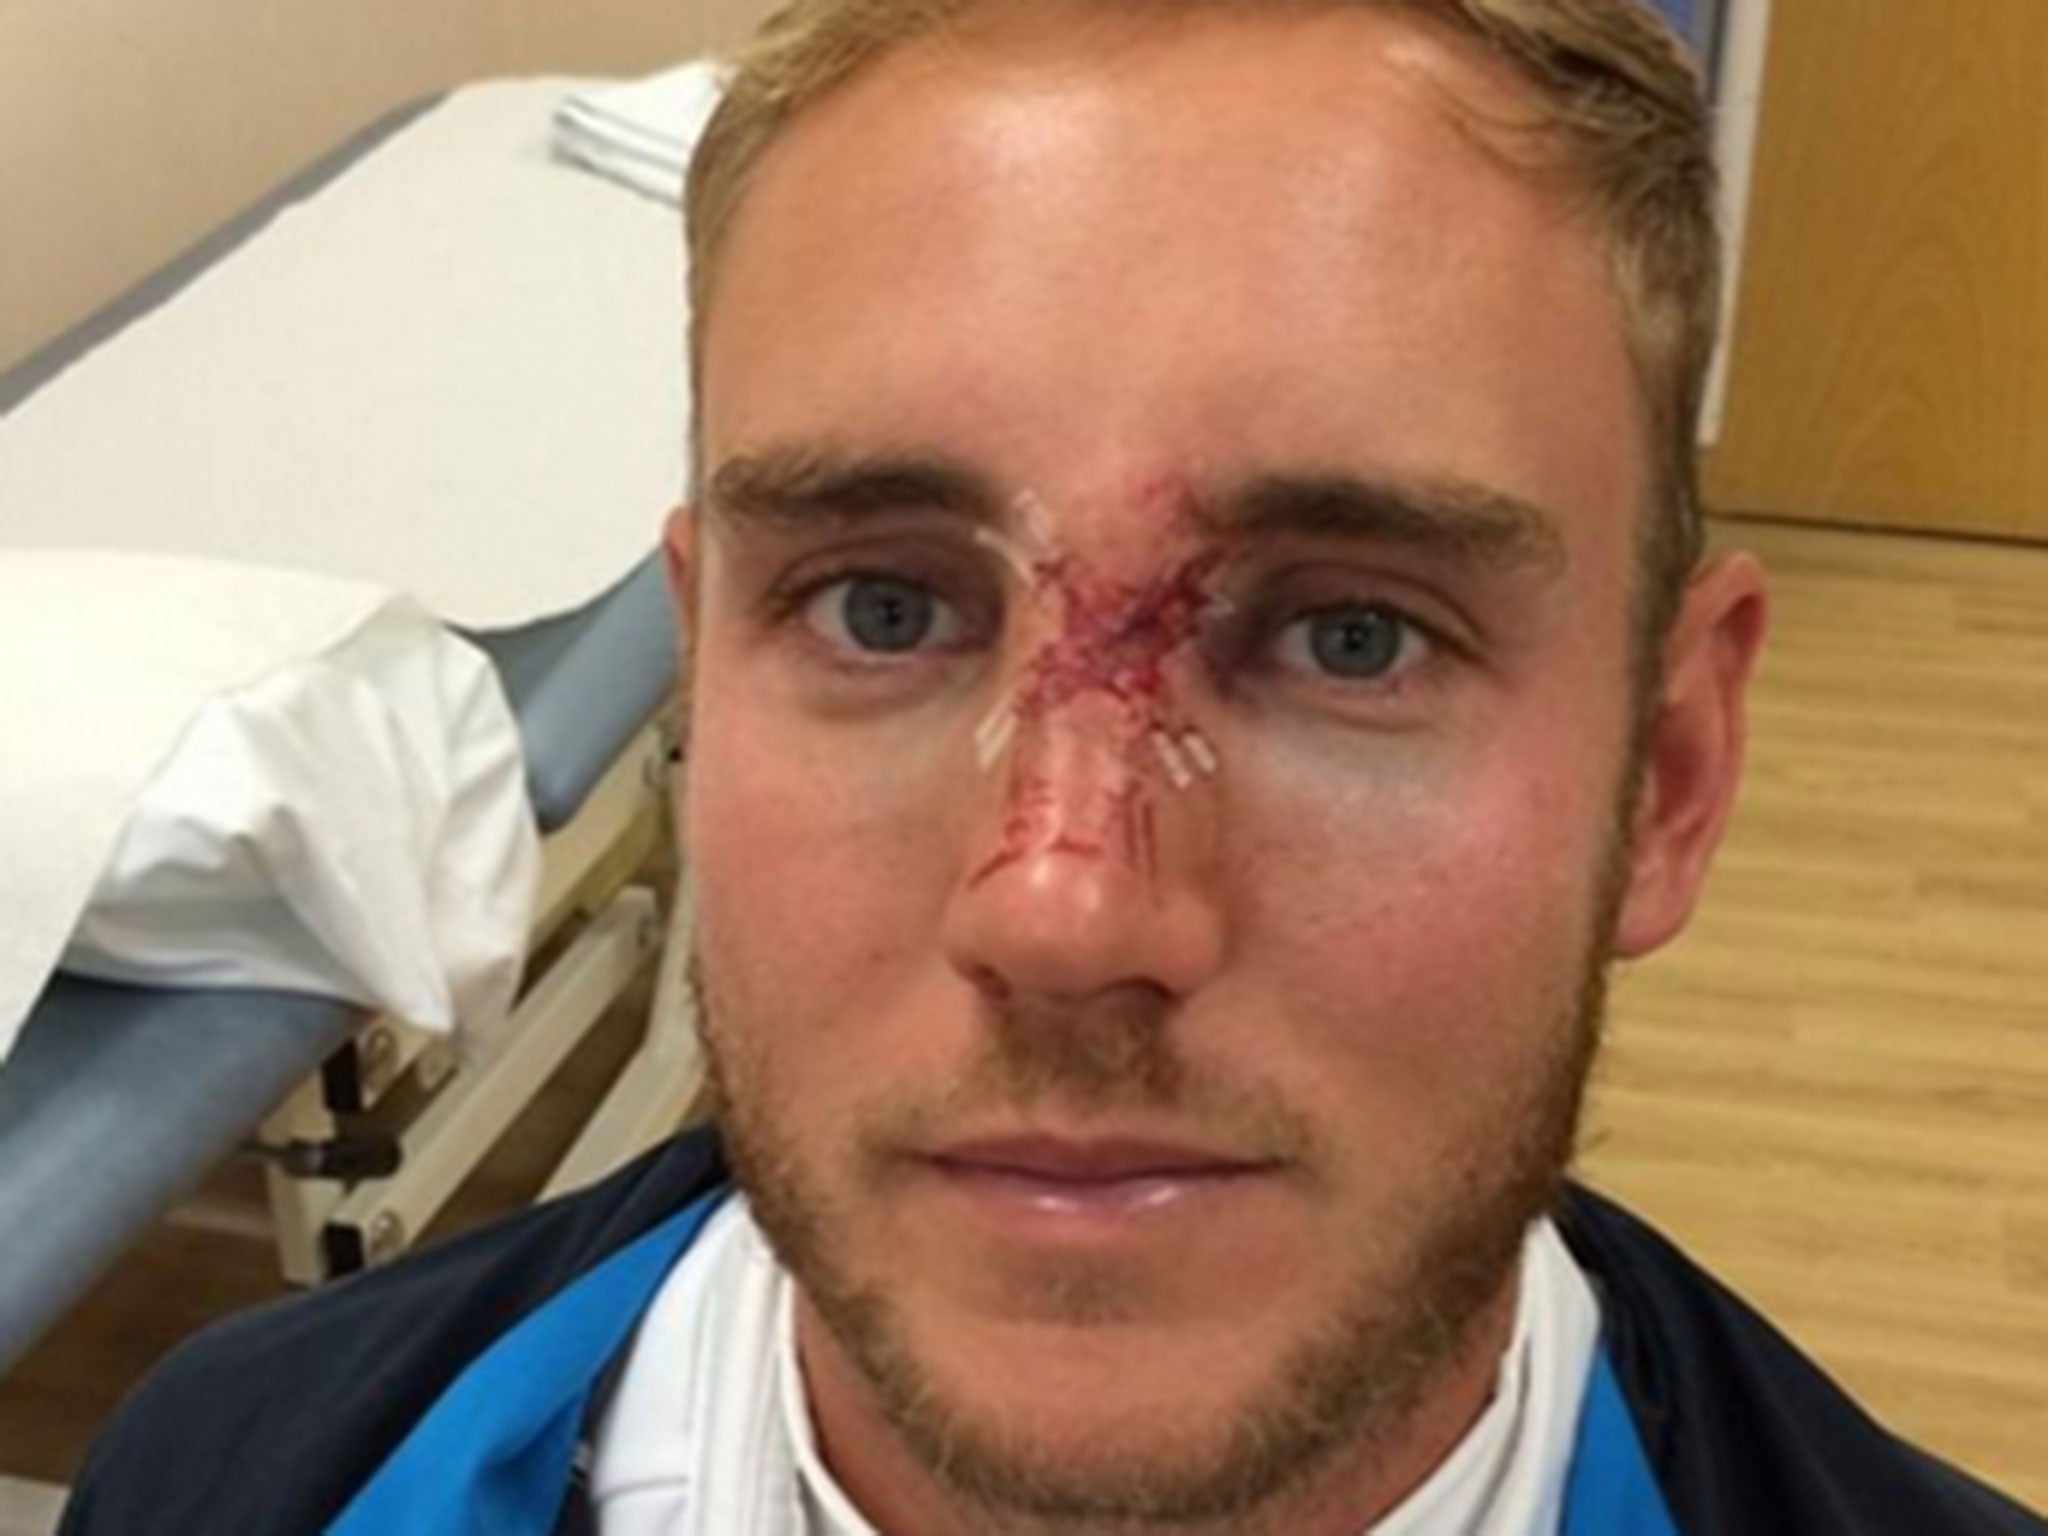 Stuart Broad shows his fractured nose